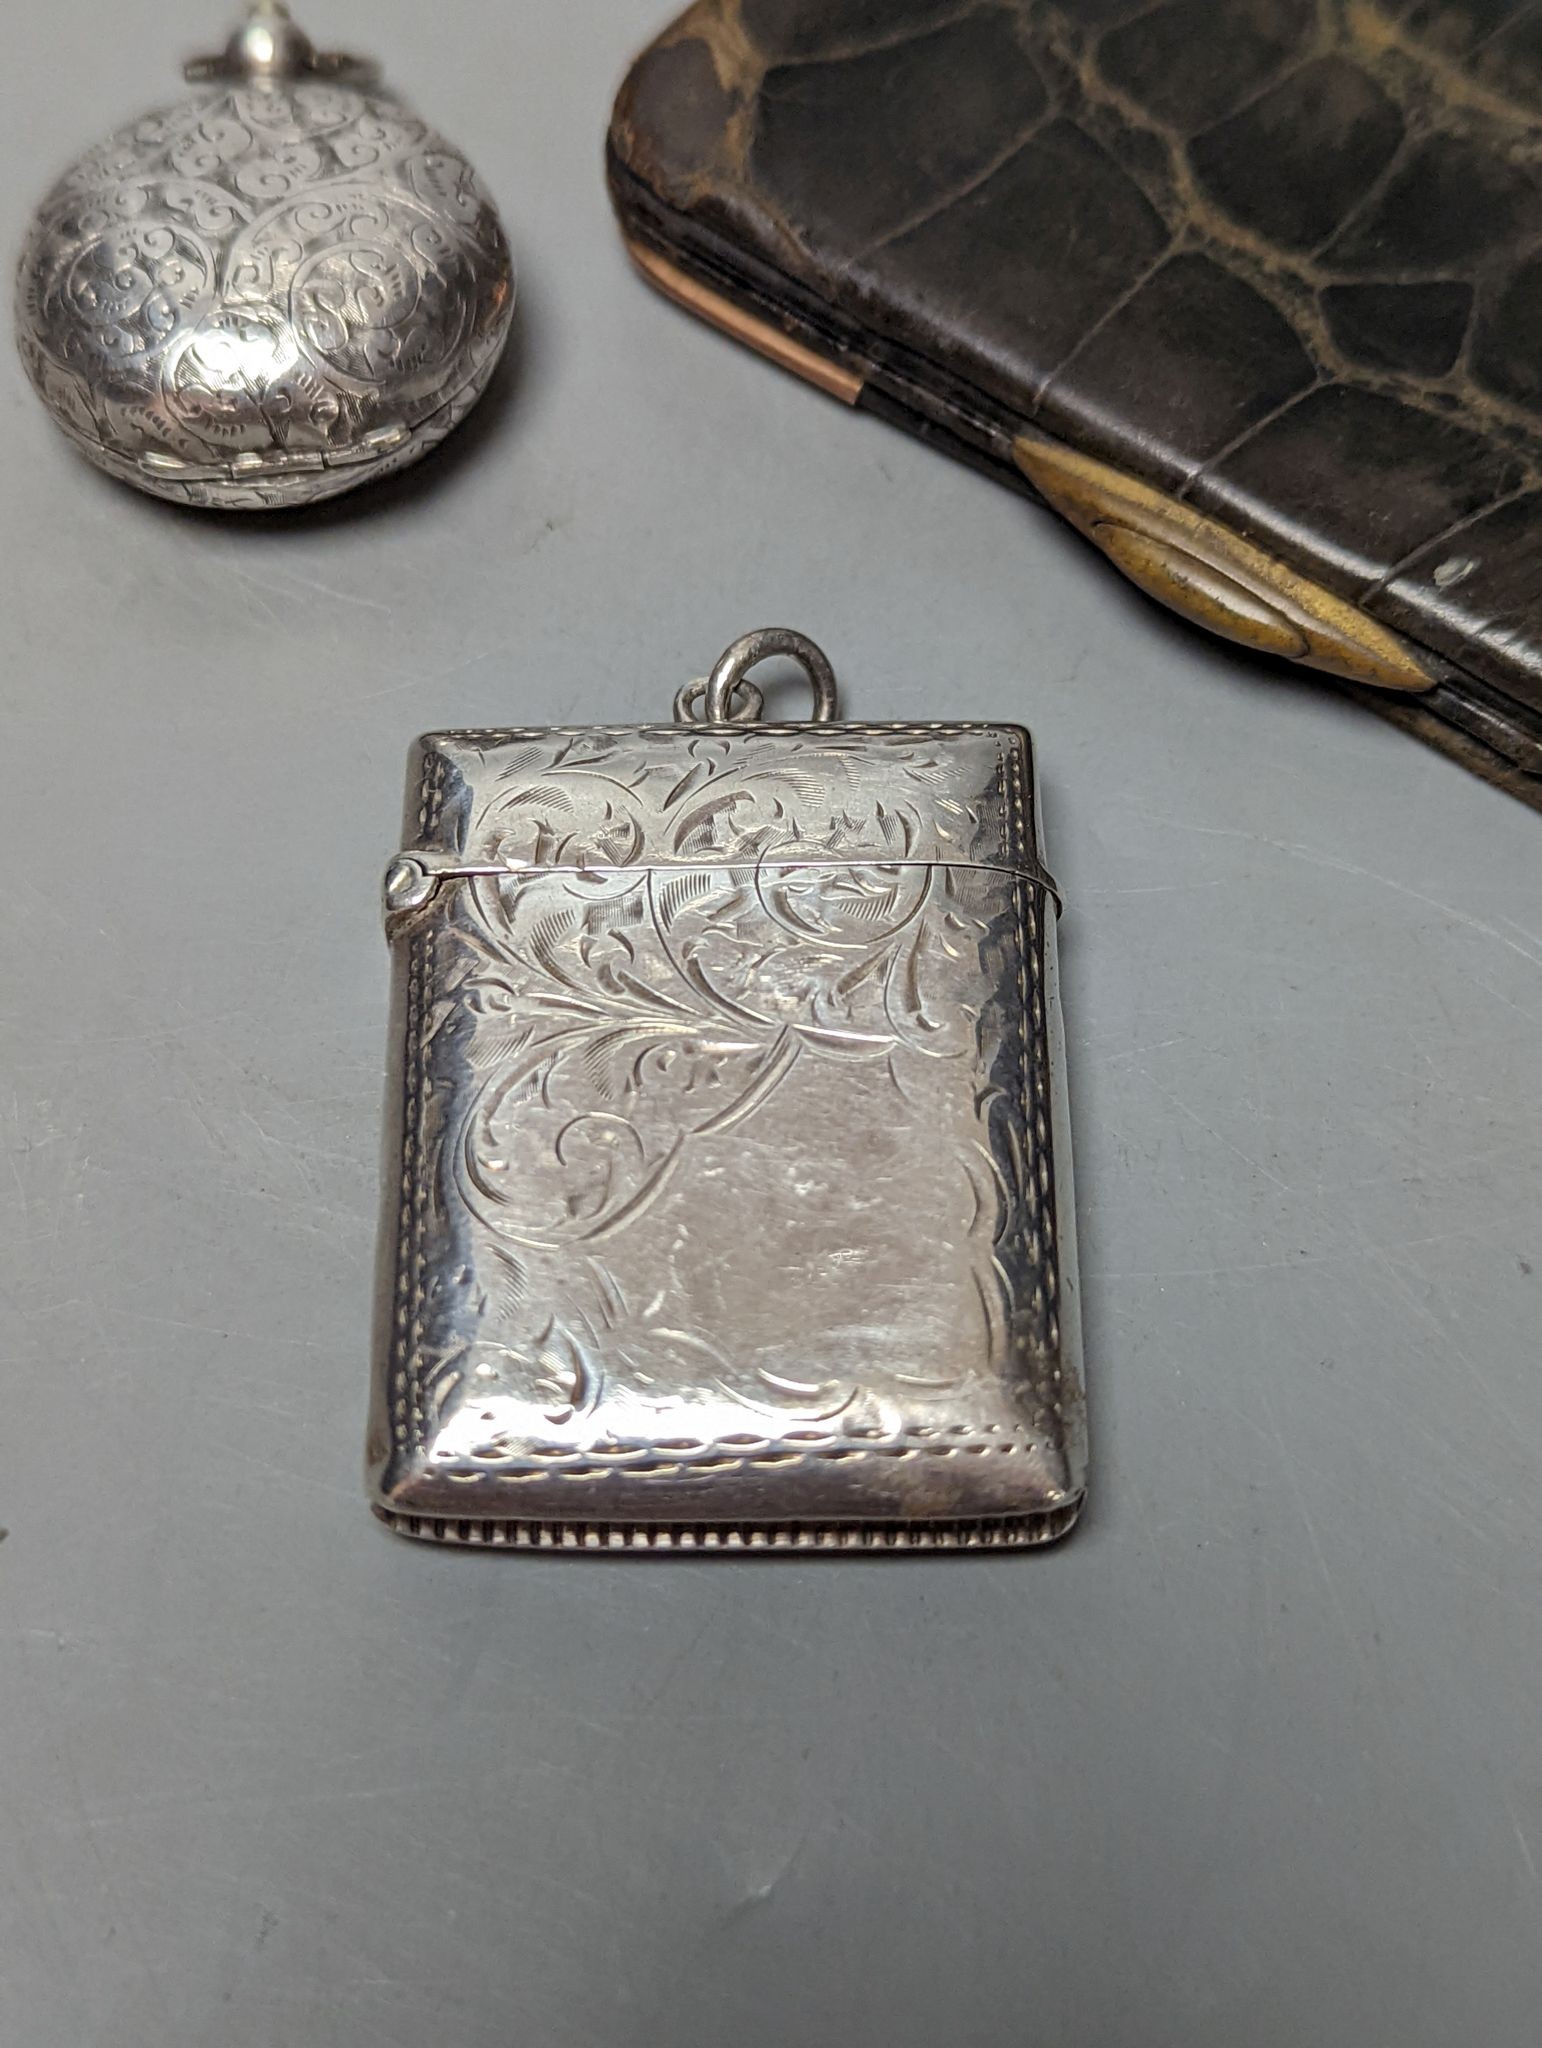 A late Victorian engraved silver sovereign case, a silver vesta case and an Edwardian 9ct gold mounted leather card purse.